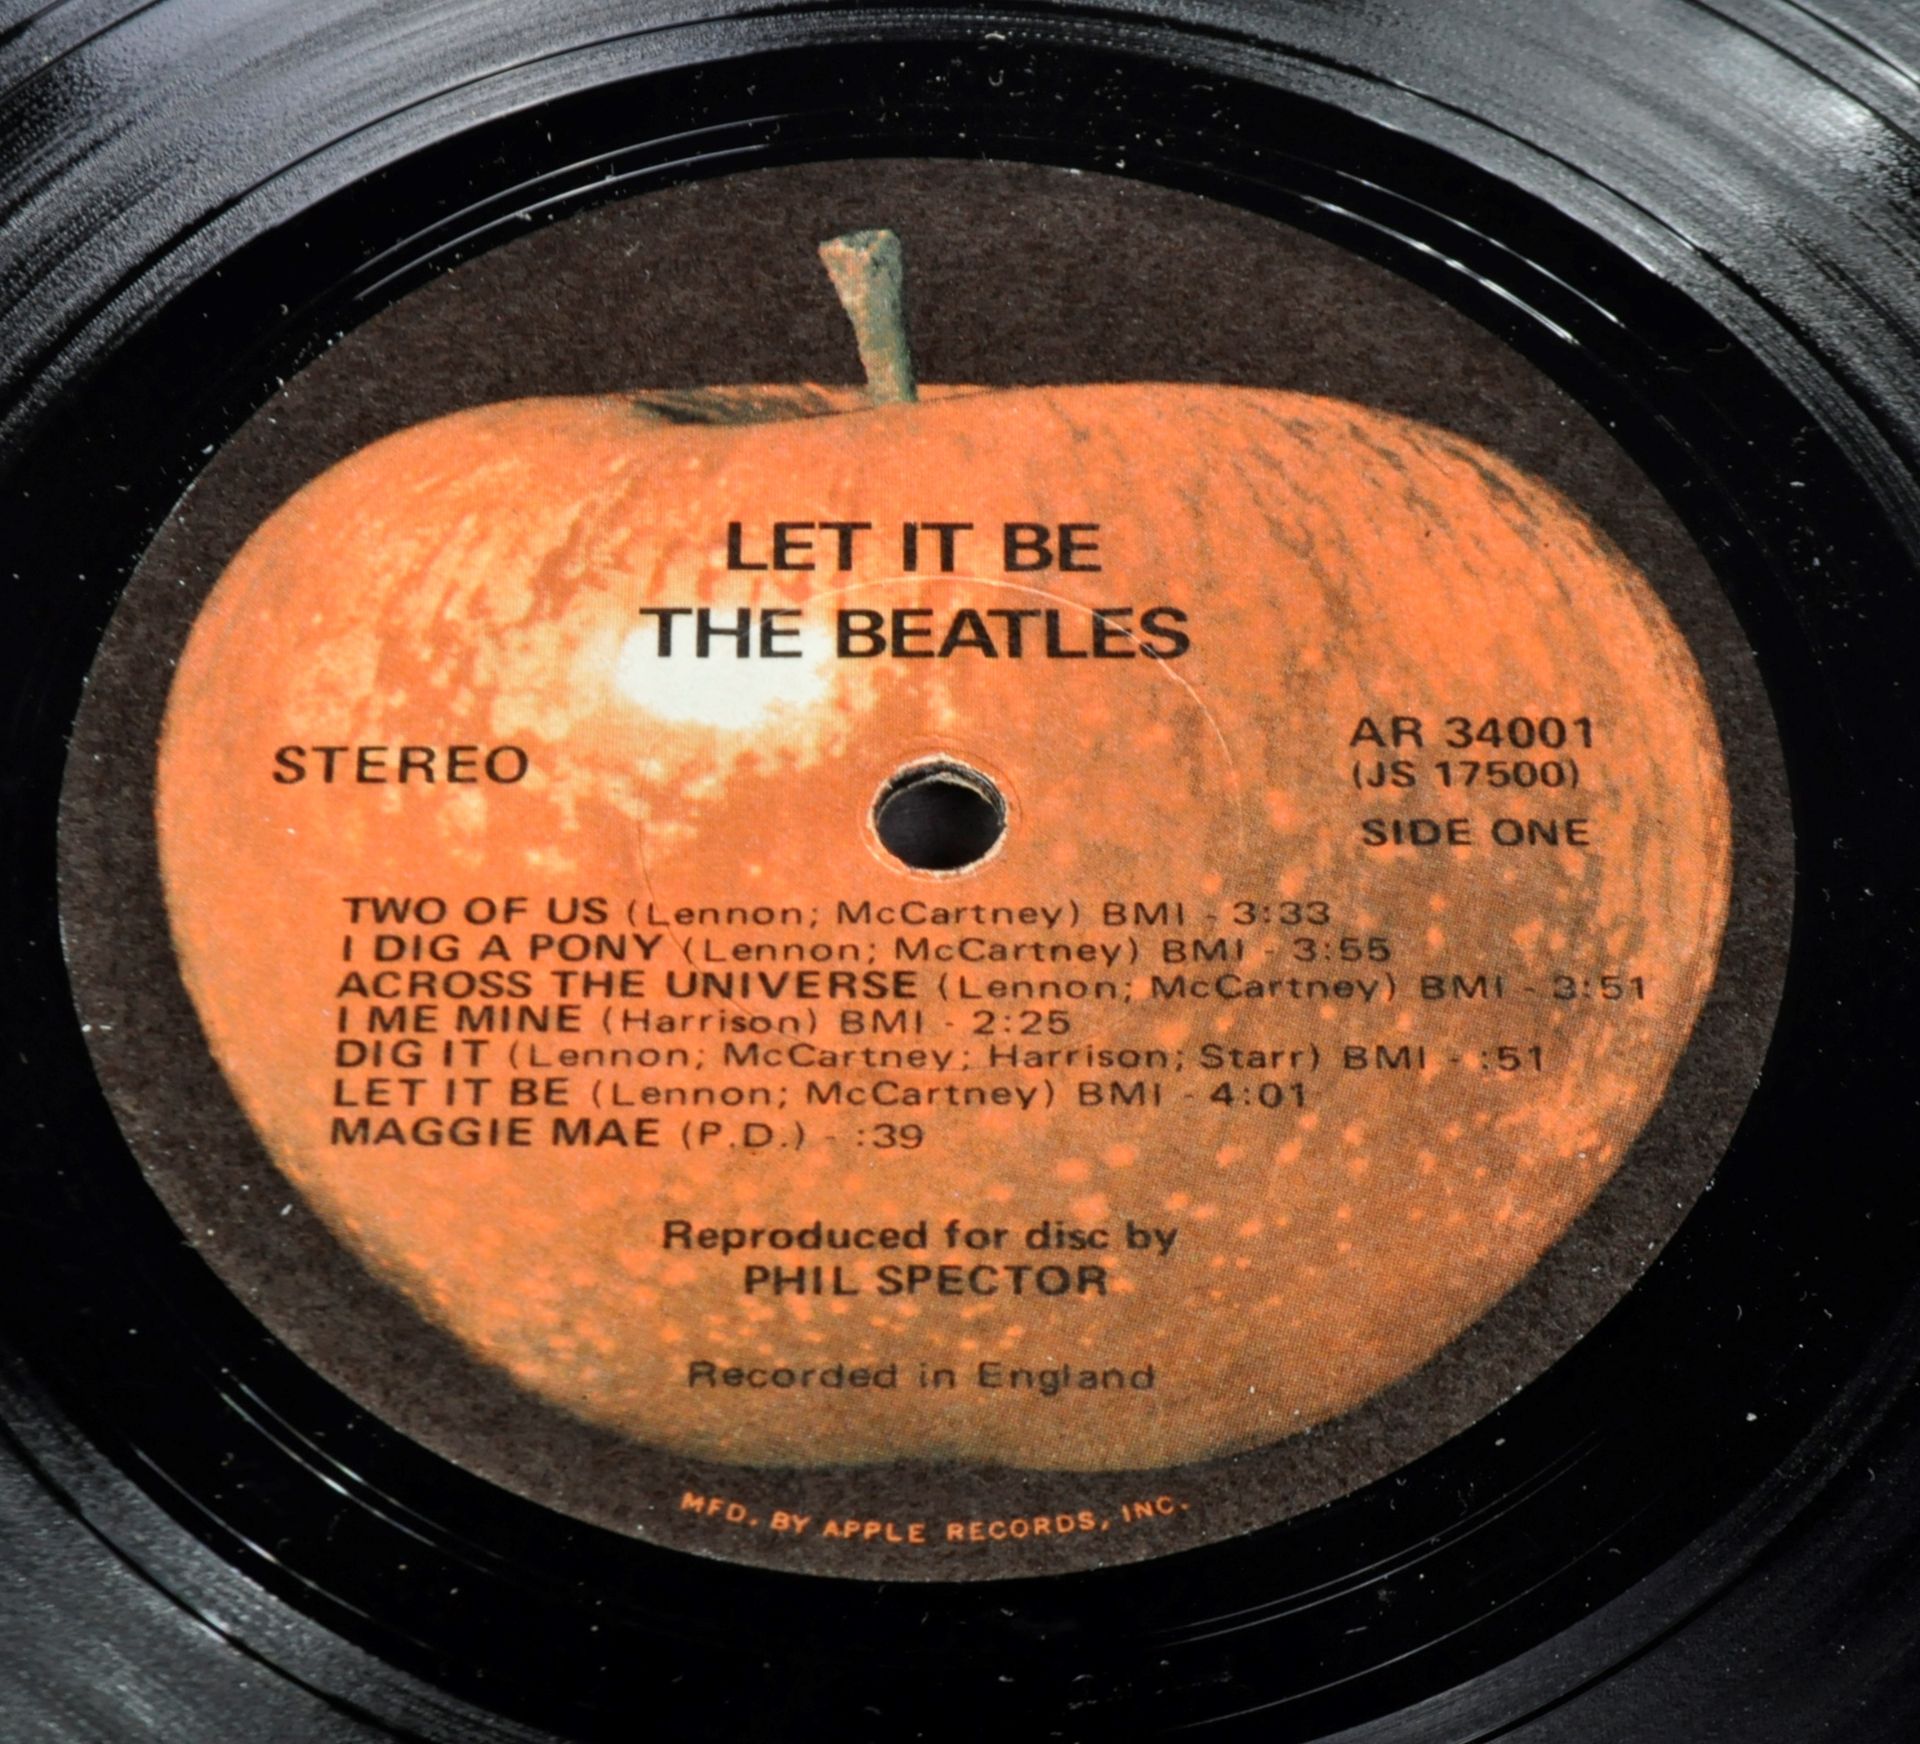 MICHAEL JAYSTON COLLECTION - BEATLES 'LET IT BE' - AMERICAN 1ST PRESS LP - Image 2 of 5